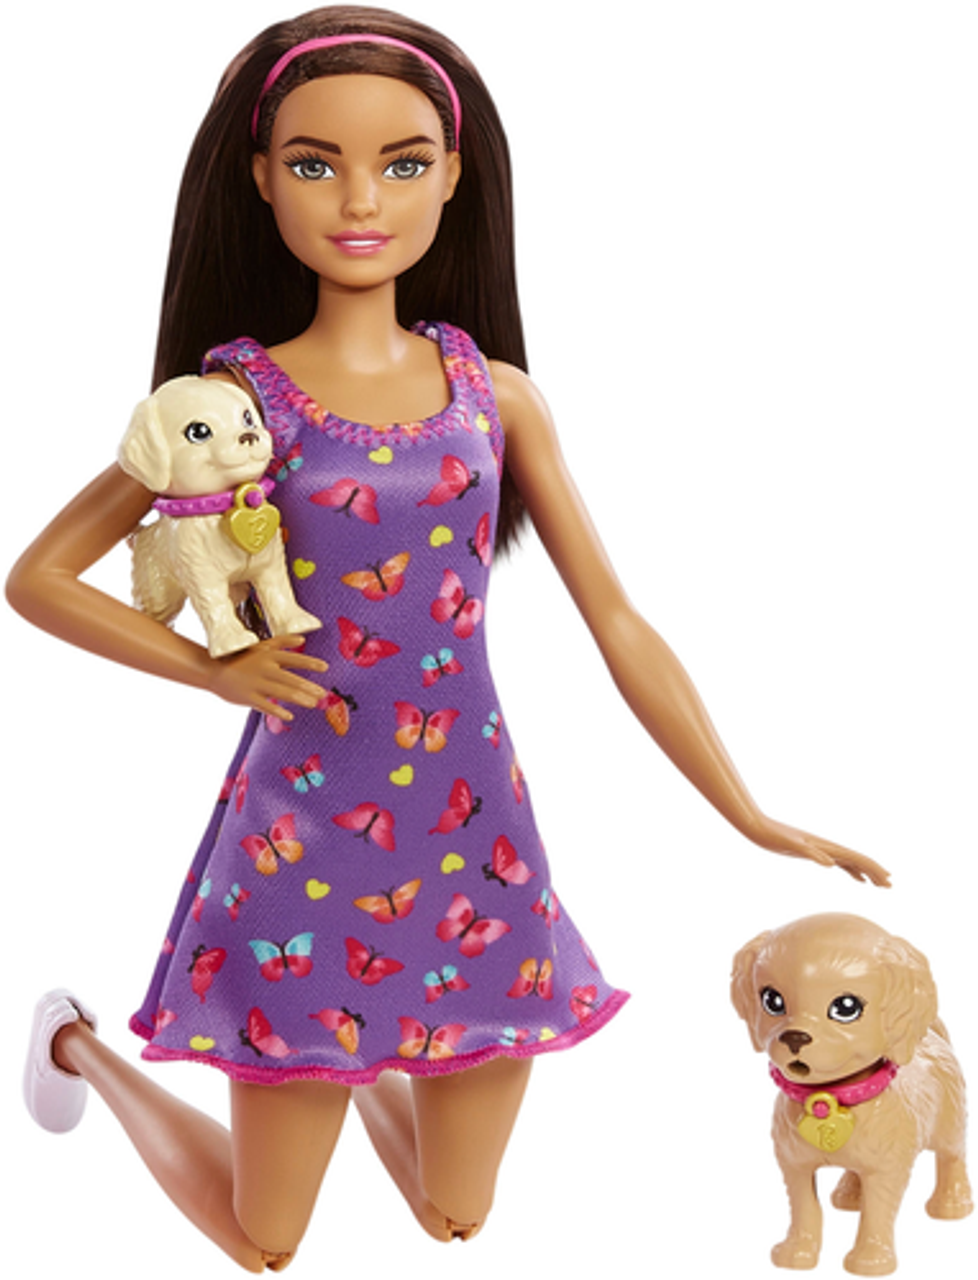 Barbie - Pup Adoption Playset with Doll